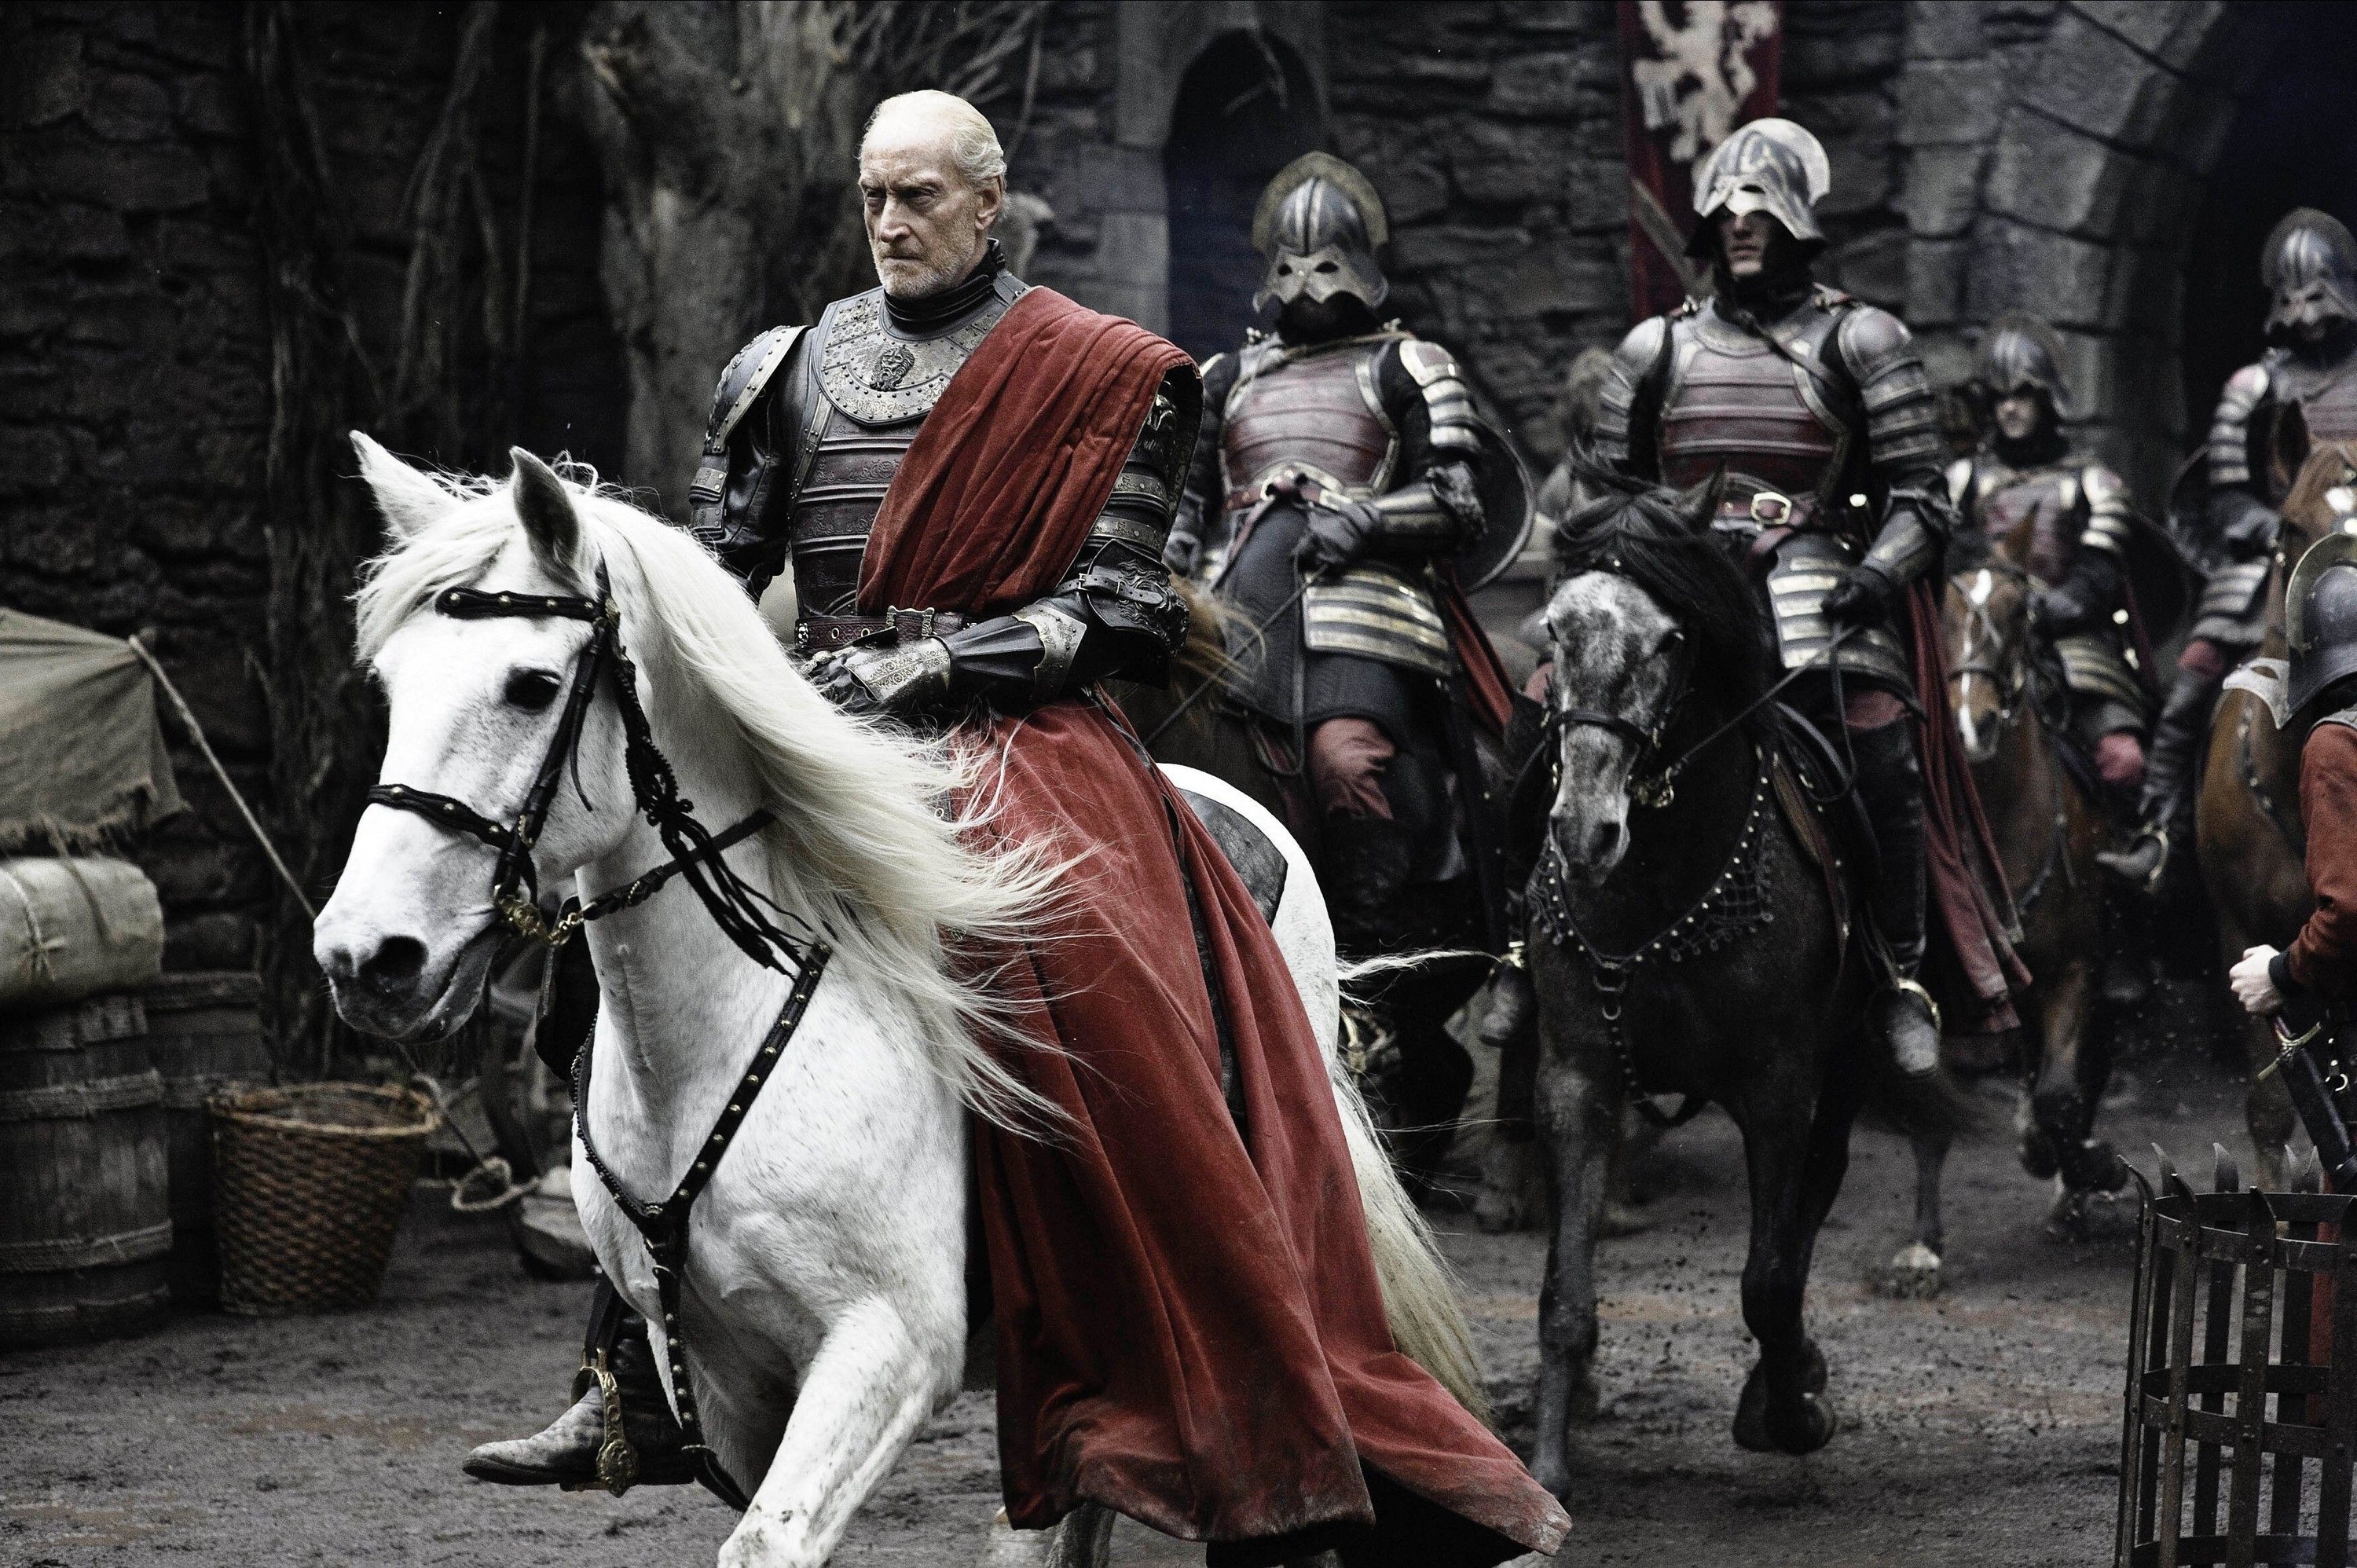 A man with a red cape and armor rides in on a white horse.